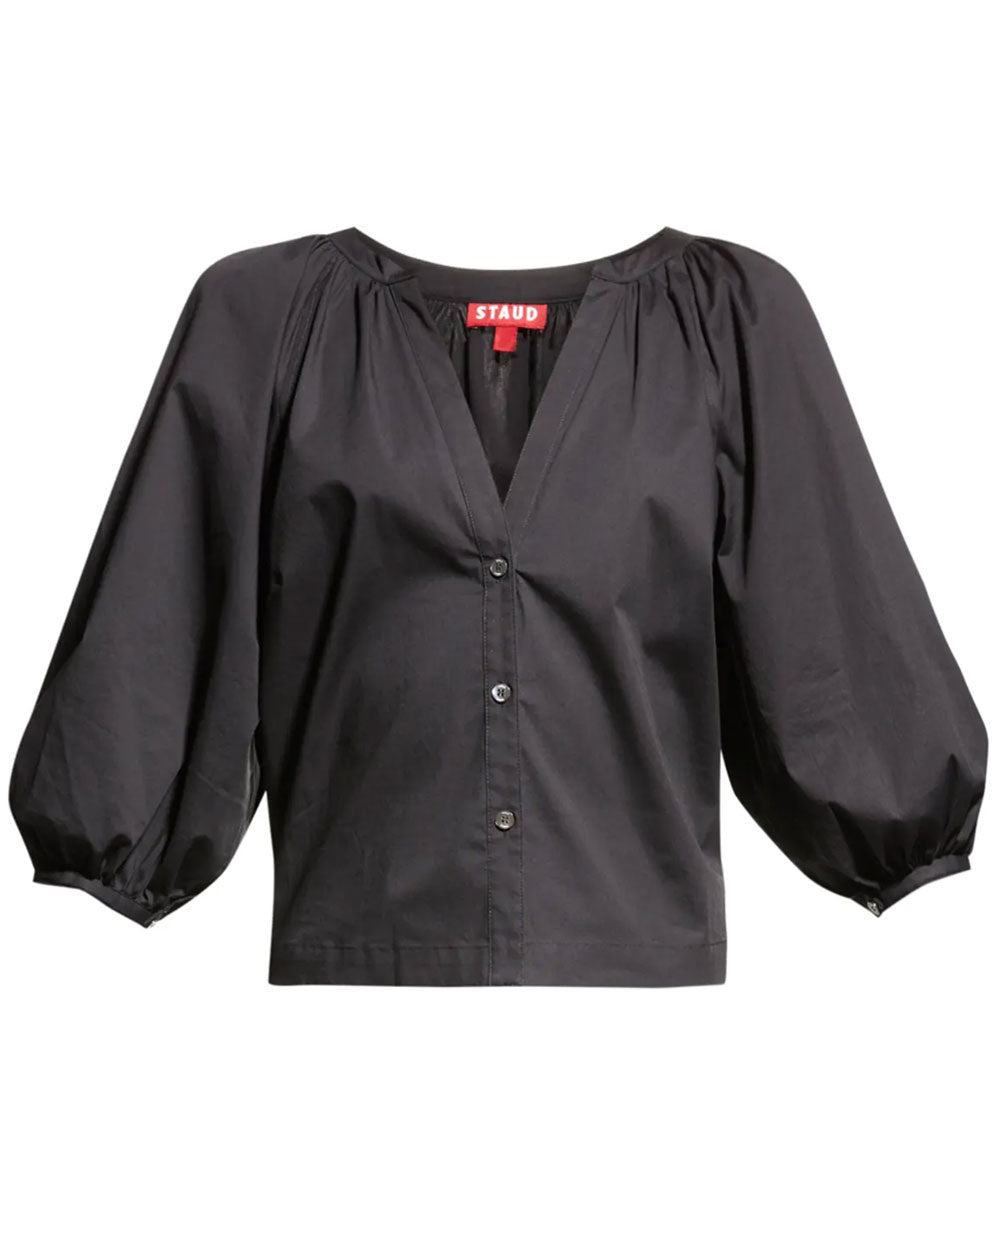 Black New Dill Blouse